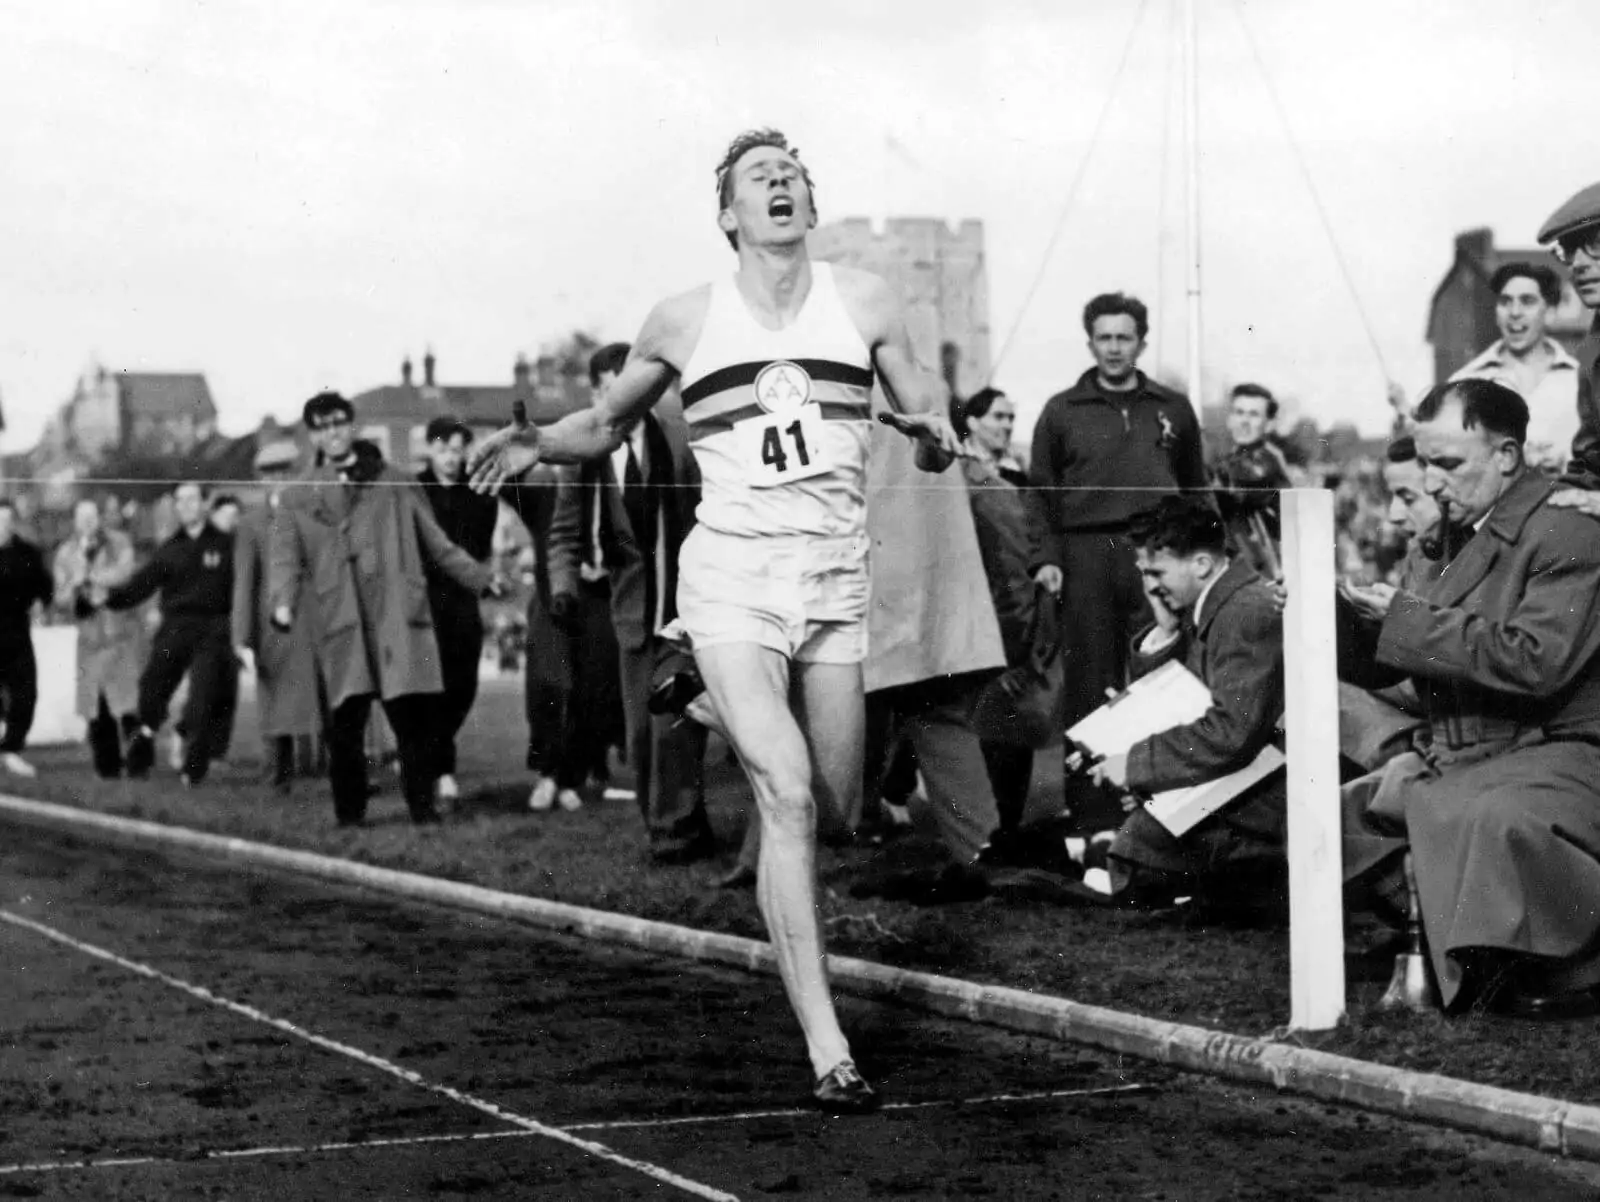 Sports Photography Camera Strategies - Sir Roger Bannister Completes a Sub-Four Minute Mile - Getty Images